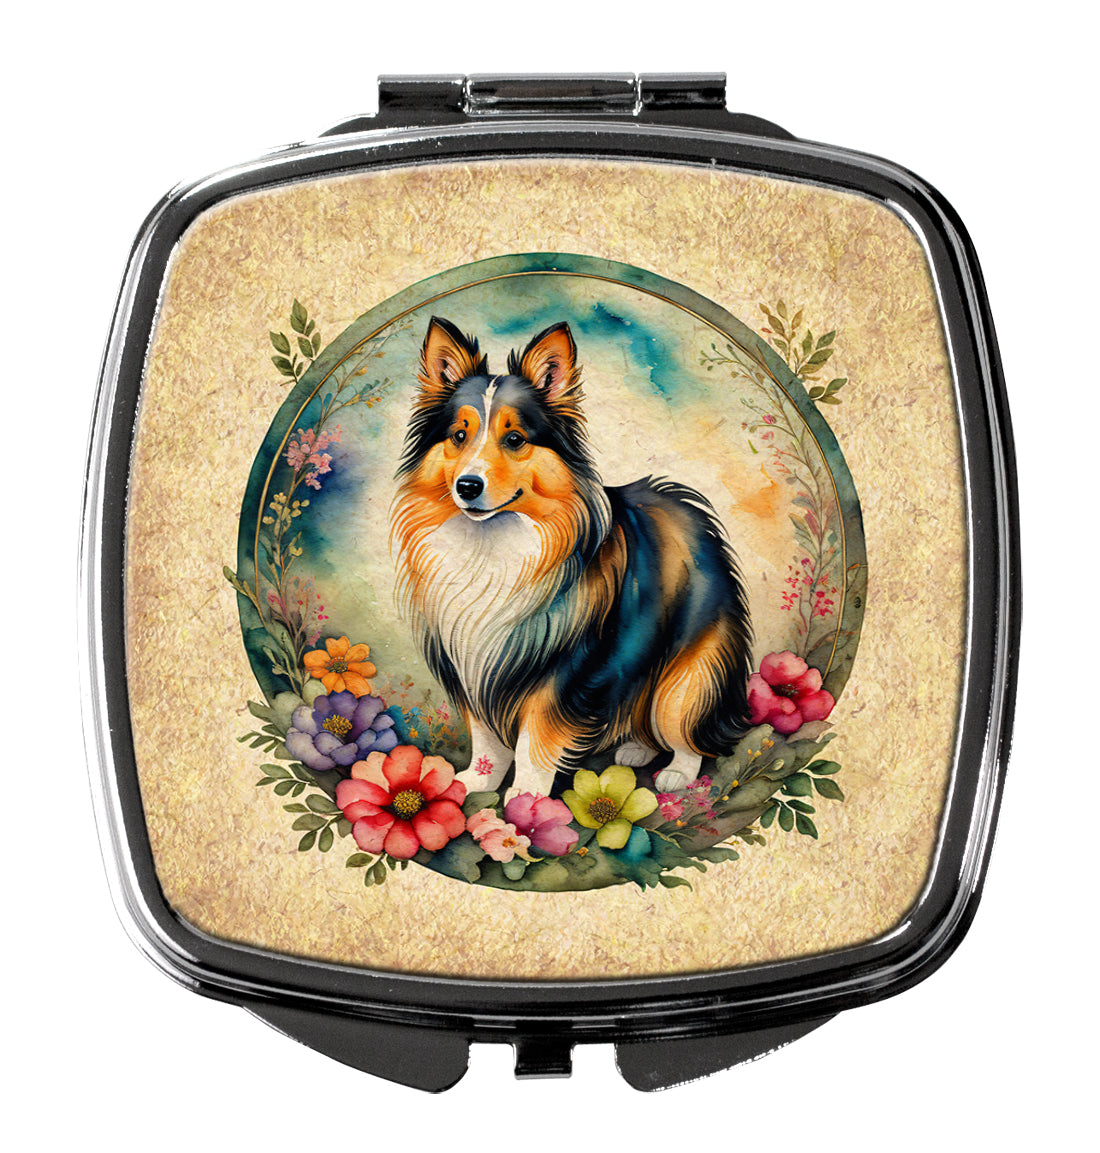 Buy this Sheltie and Flowers Compact Mirror